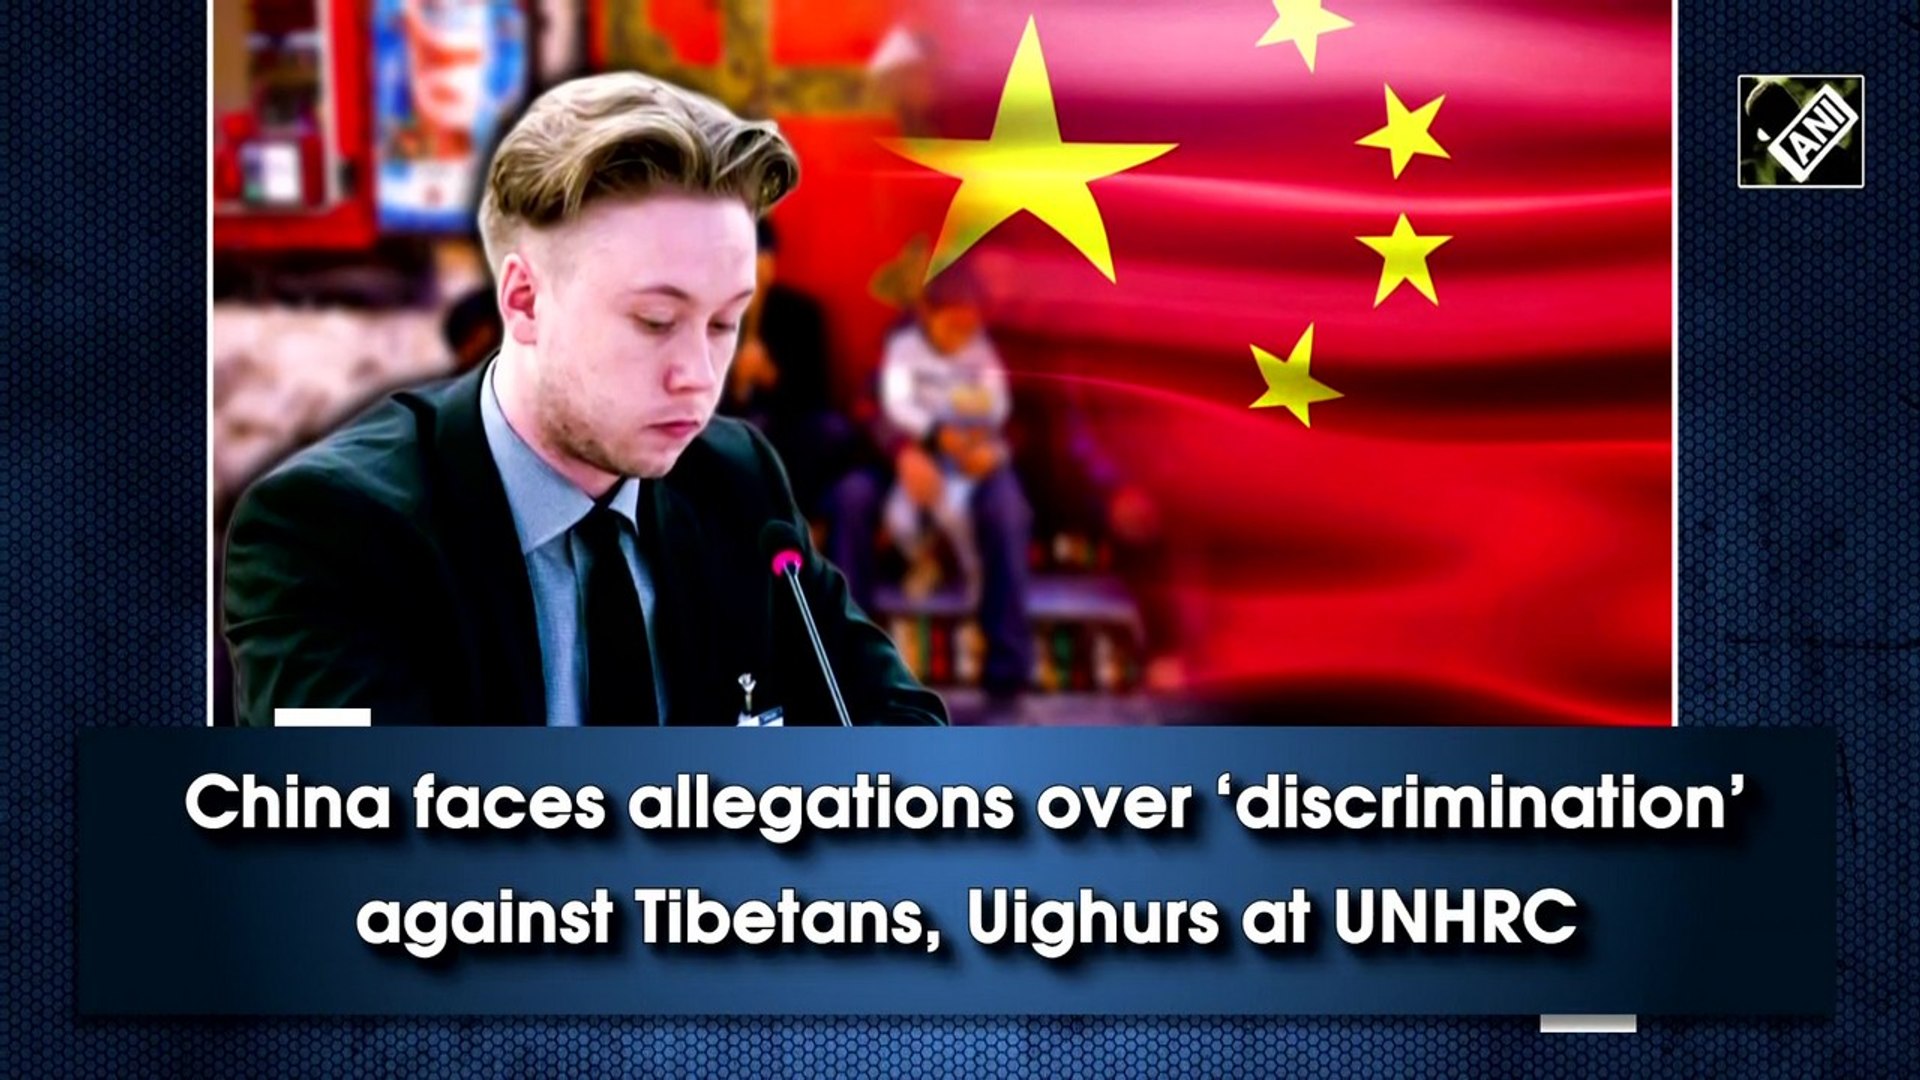 UNHRC: China accussed of 'discrimination' against Tibetans, Uighurs - video Dailymotion